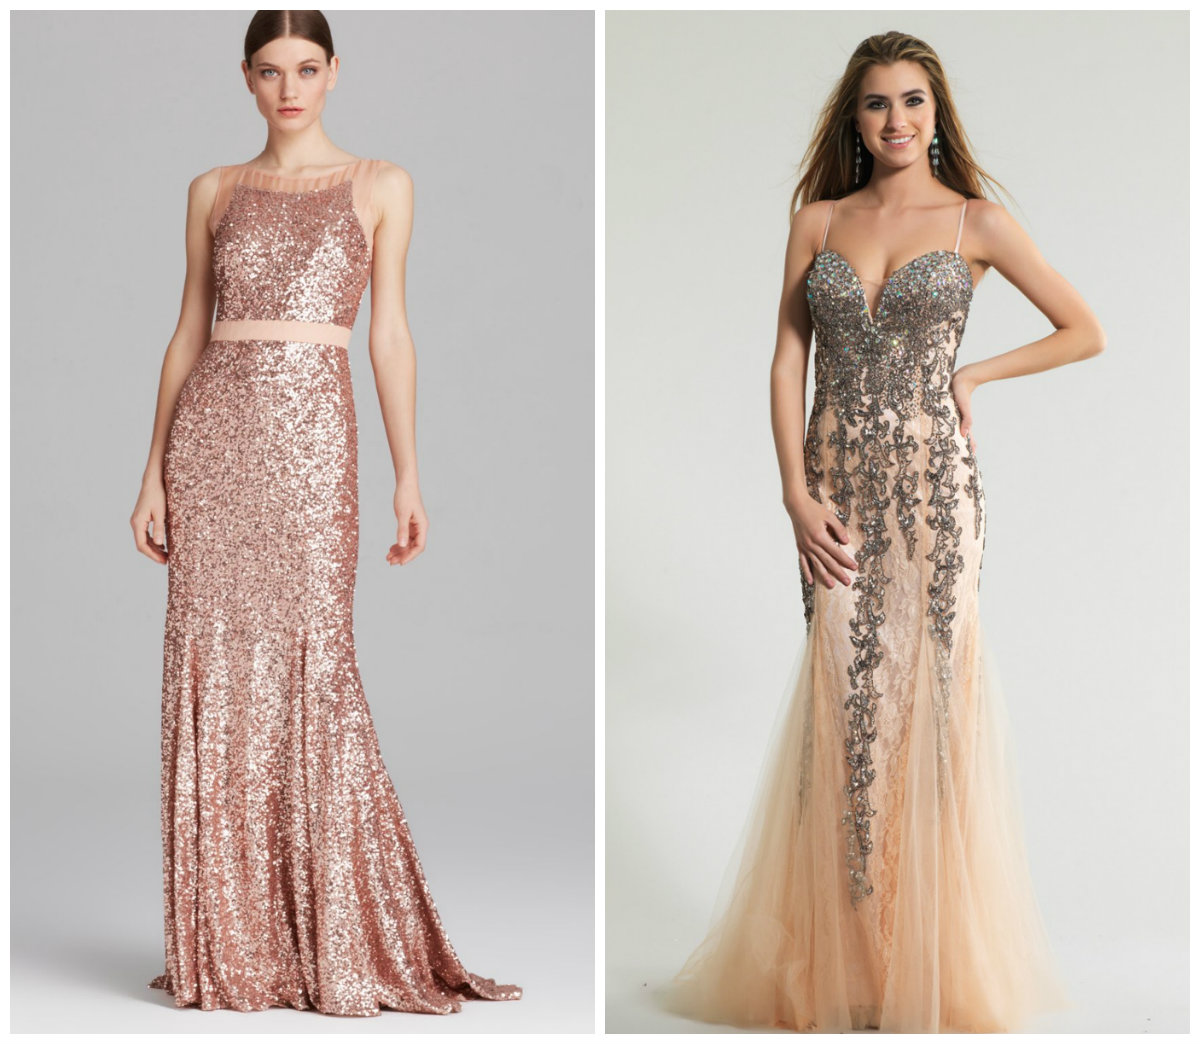 Blush Sequin Maxi Dress - Where To Find In 2017